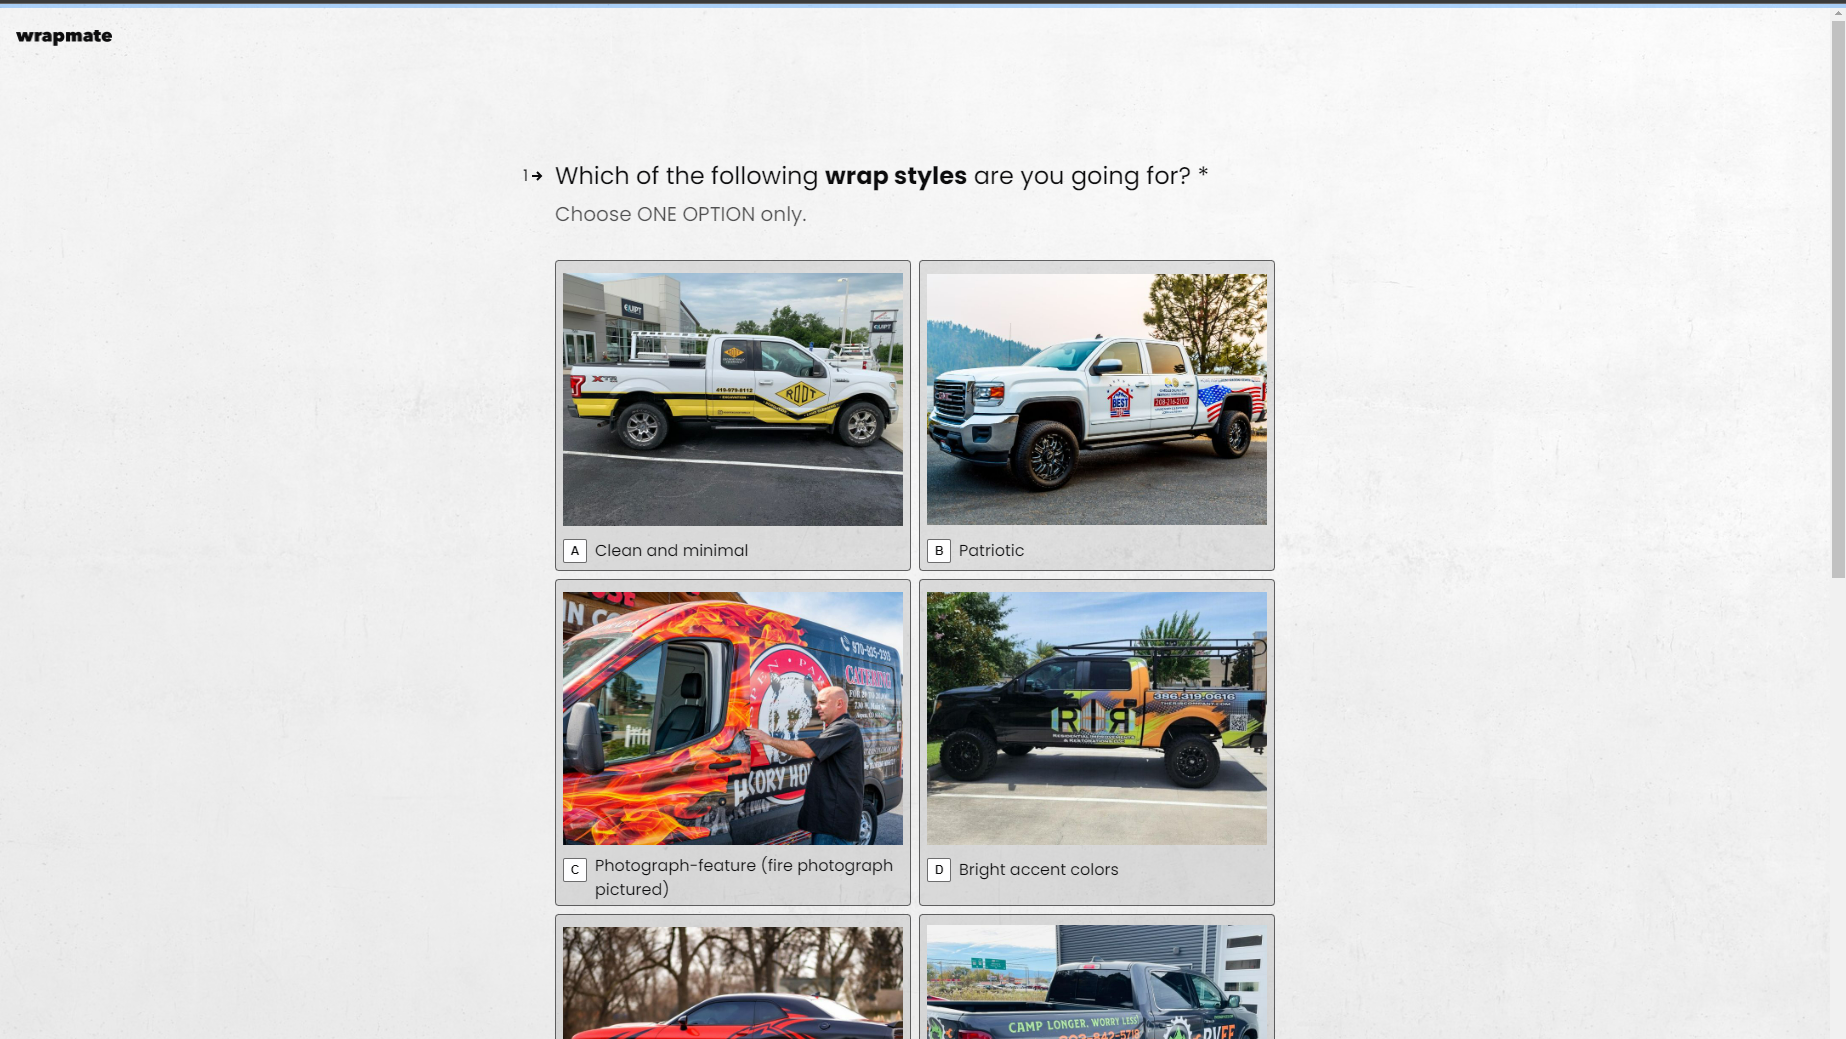 A grid of vehicles in which each vehicle depicts a design style a customer may select from